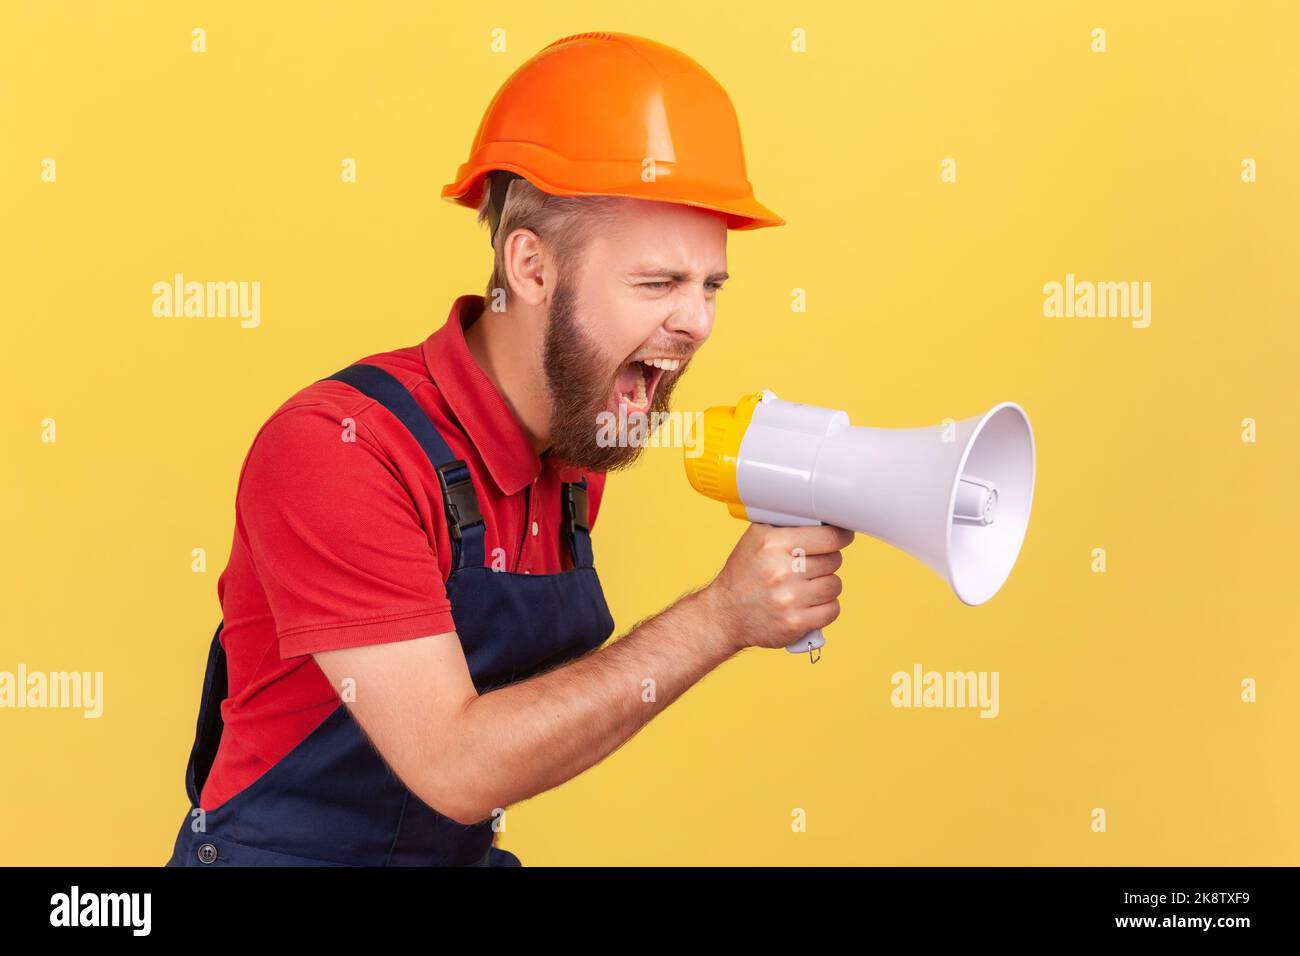 Side view of angry bearded worker wearing protective helmet and blue overalls holding megaphone and screaming with aggressive expression, protesting. Indoor studio shot isolated on yellow background. Stock Photo